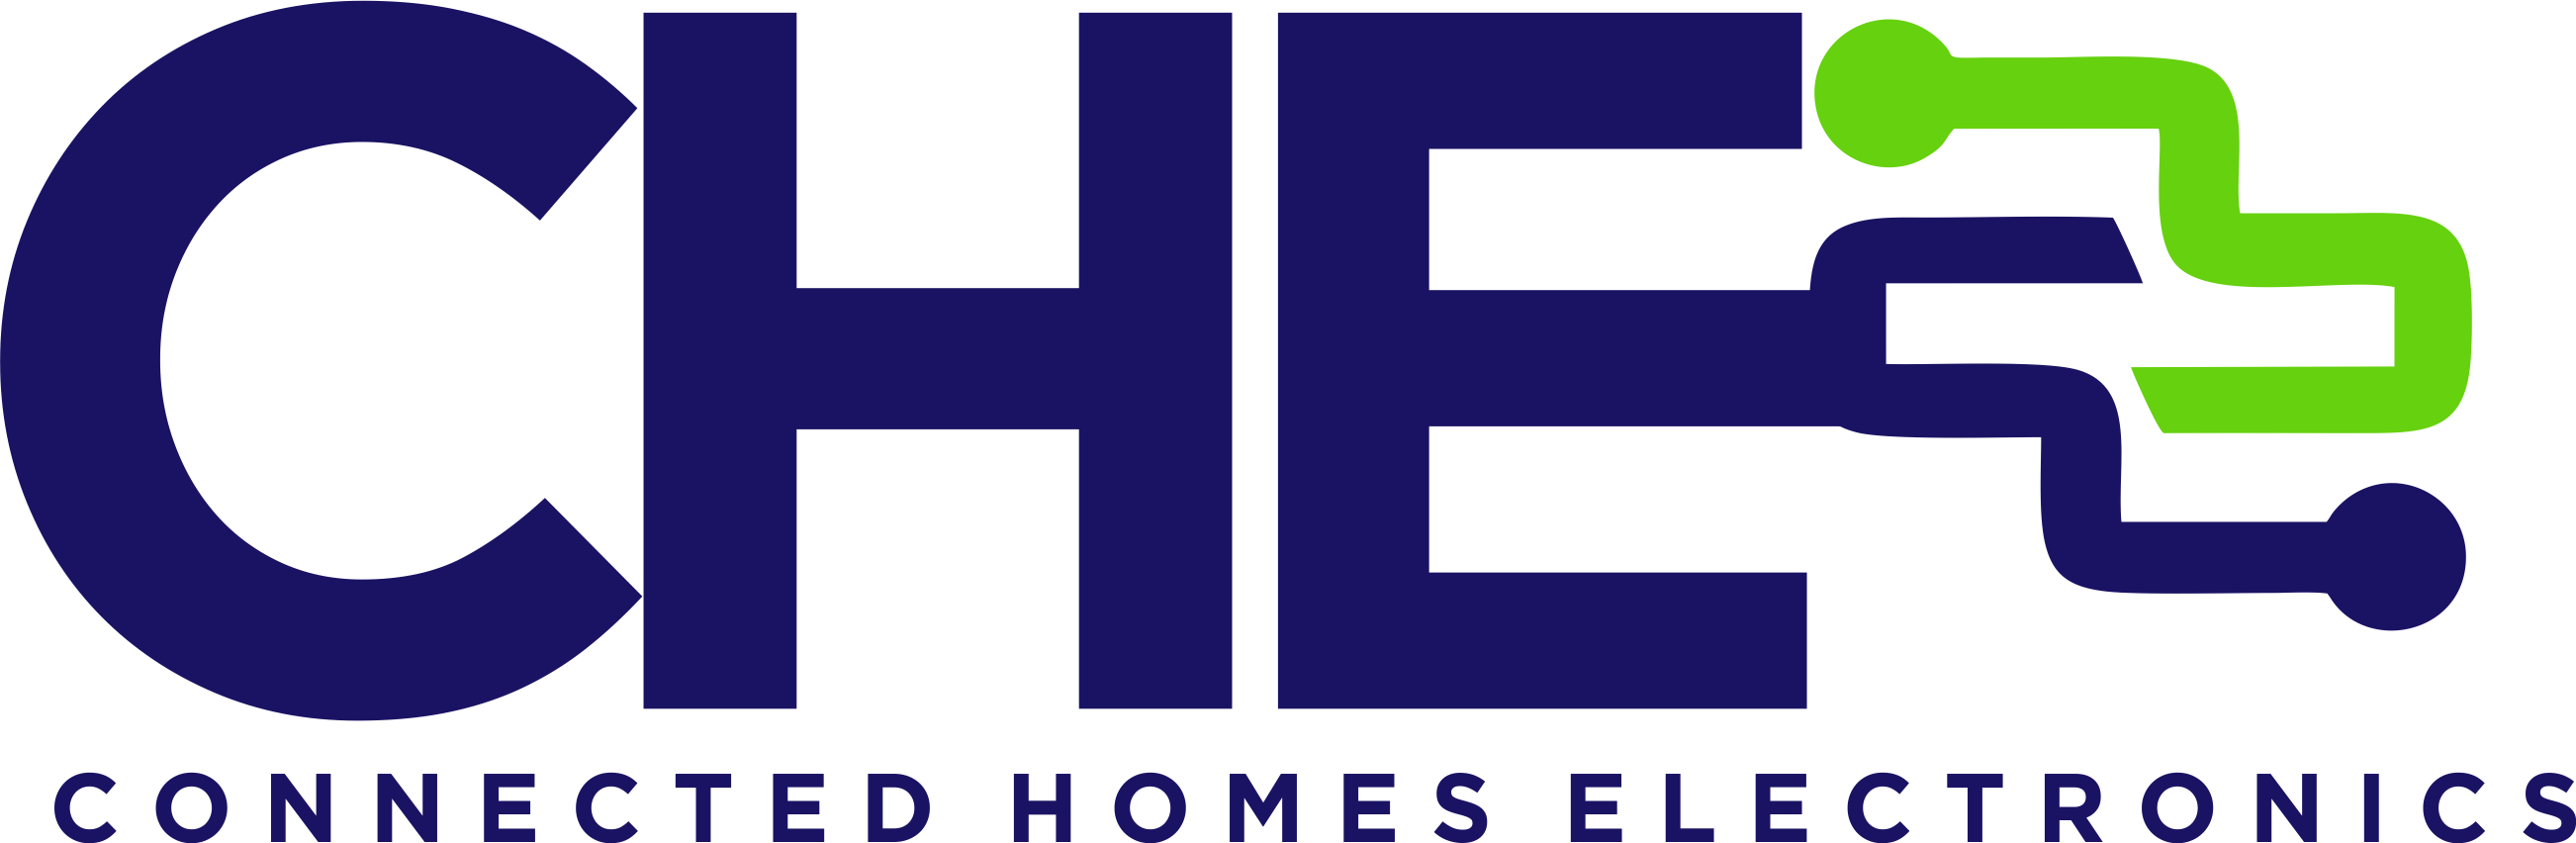 Connected Homes Electronics Support